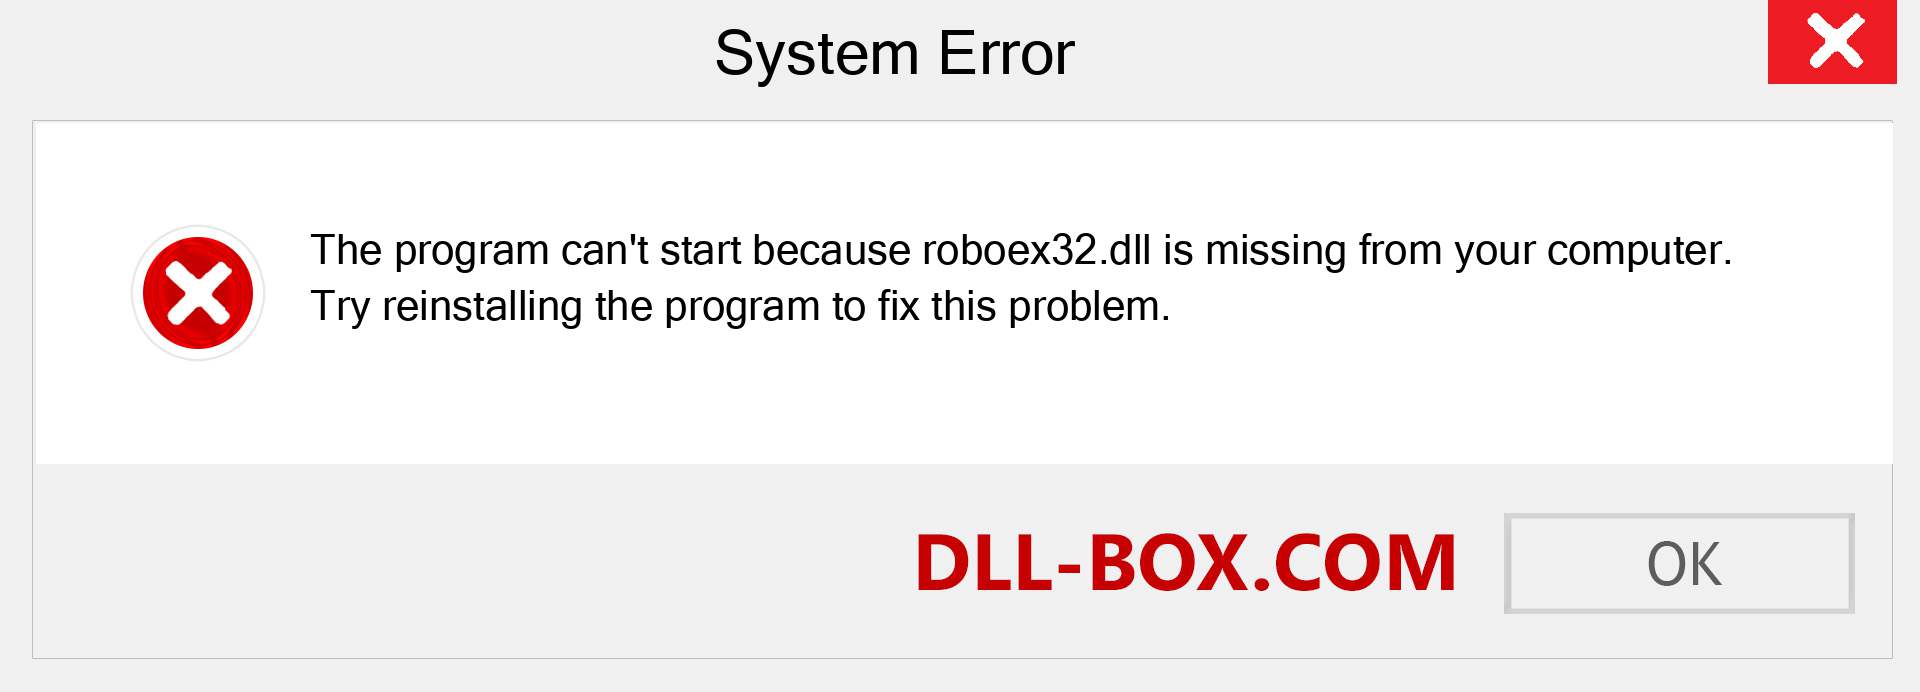  roboex32.dll file is missing?. Download for Windows 7, 8, 10 - Fix  roboex32 dll Missing Error on Windows, photos, images